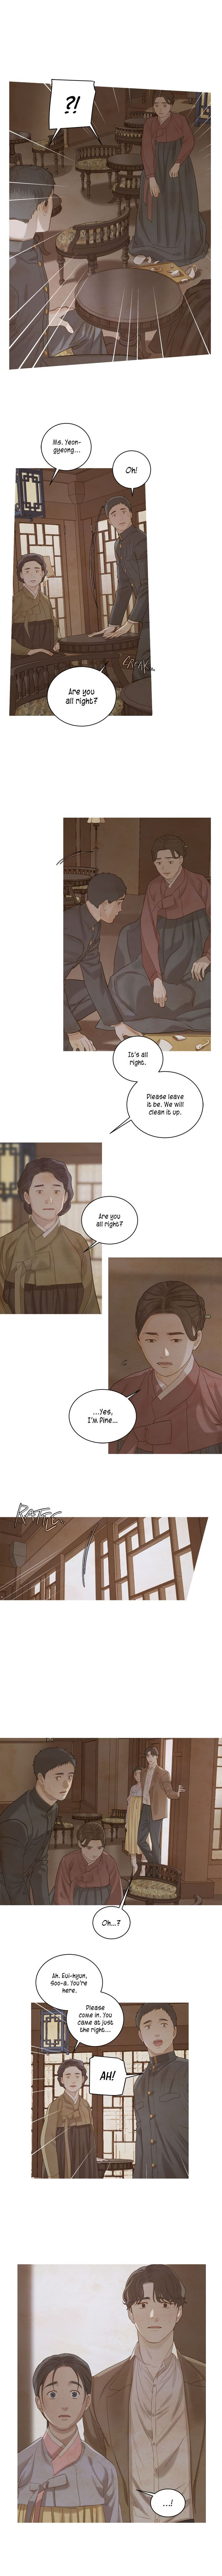 The Whale Star - The Gyeongseong Mermaid - Chapter 29 Page 4